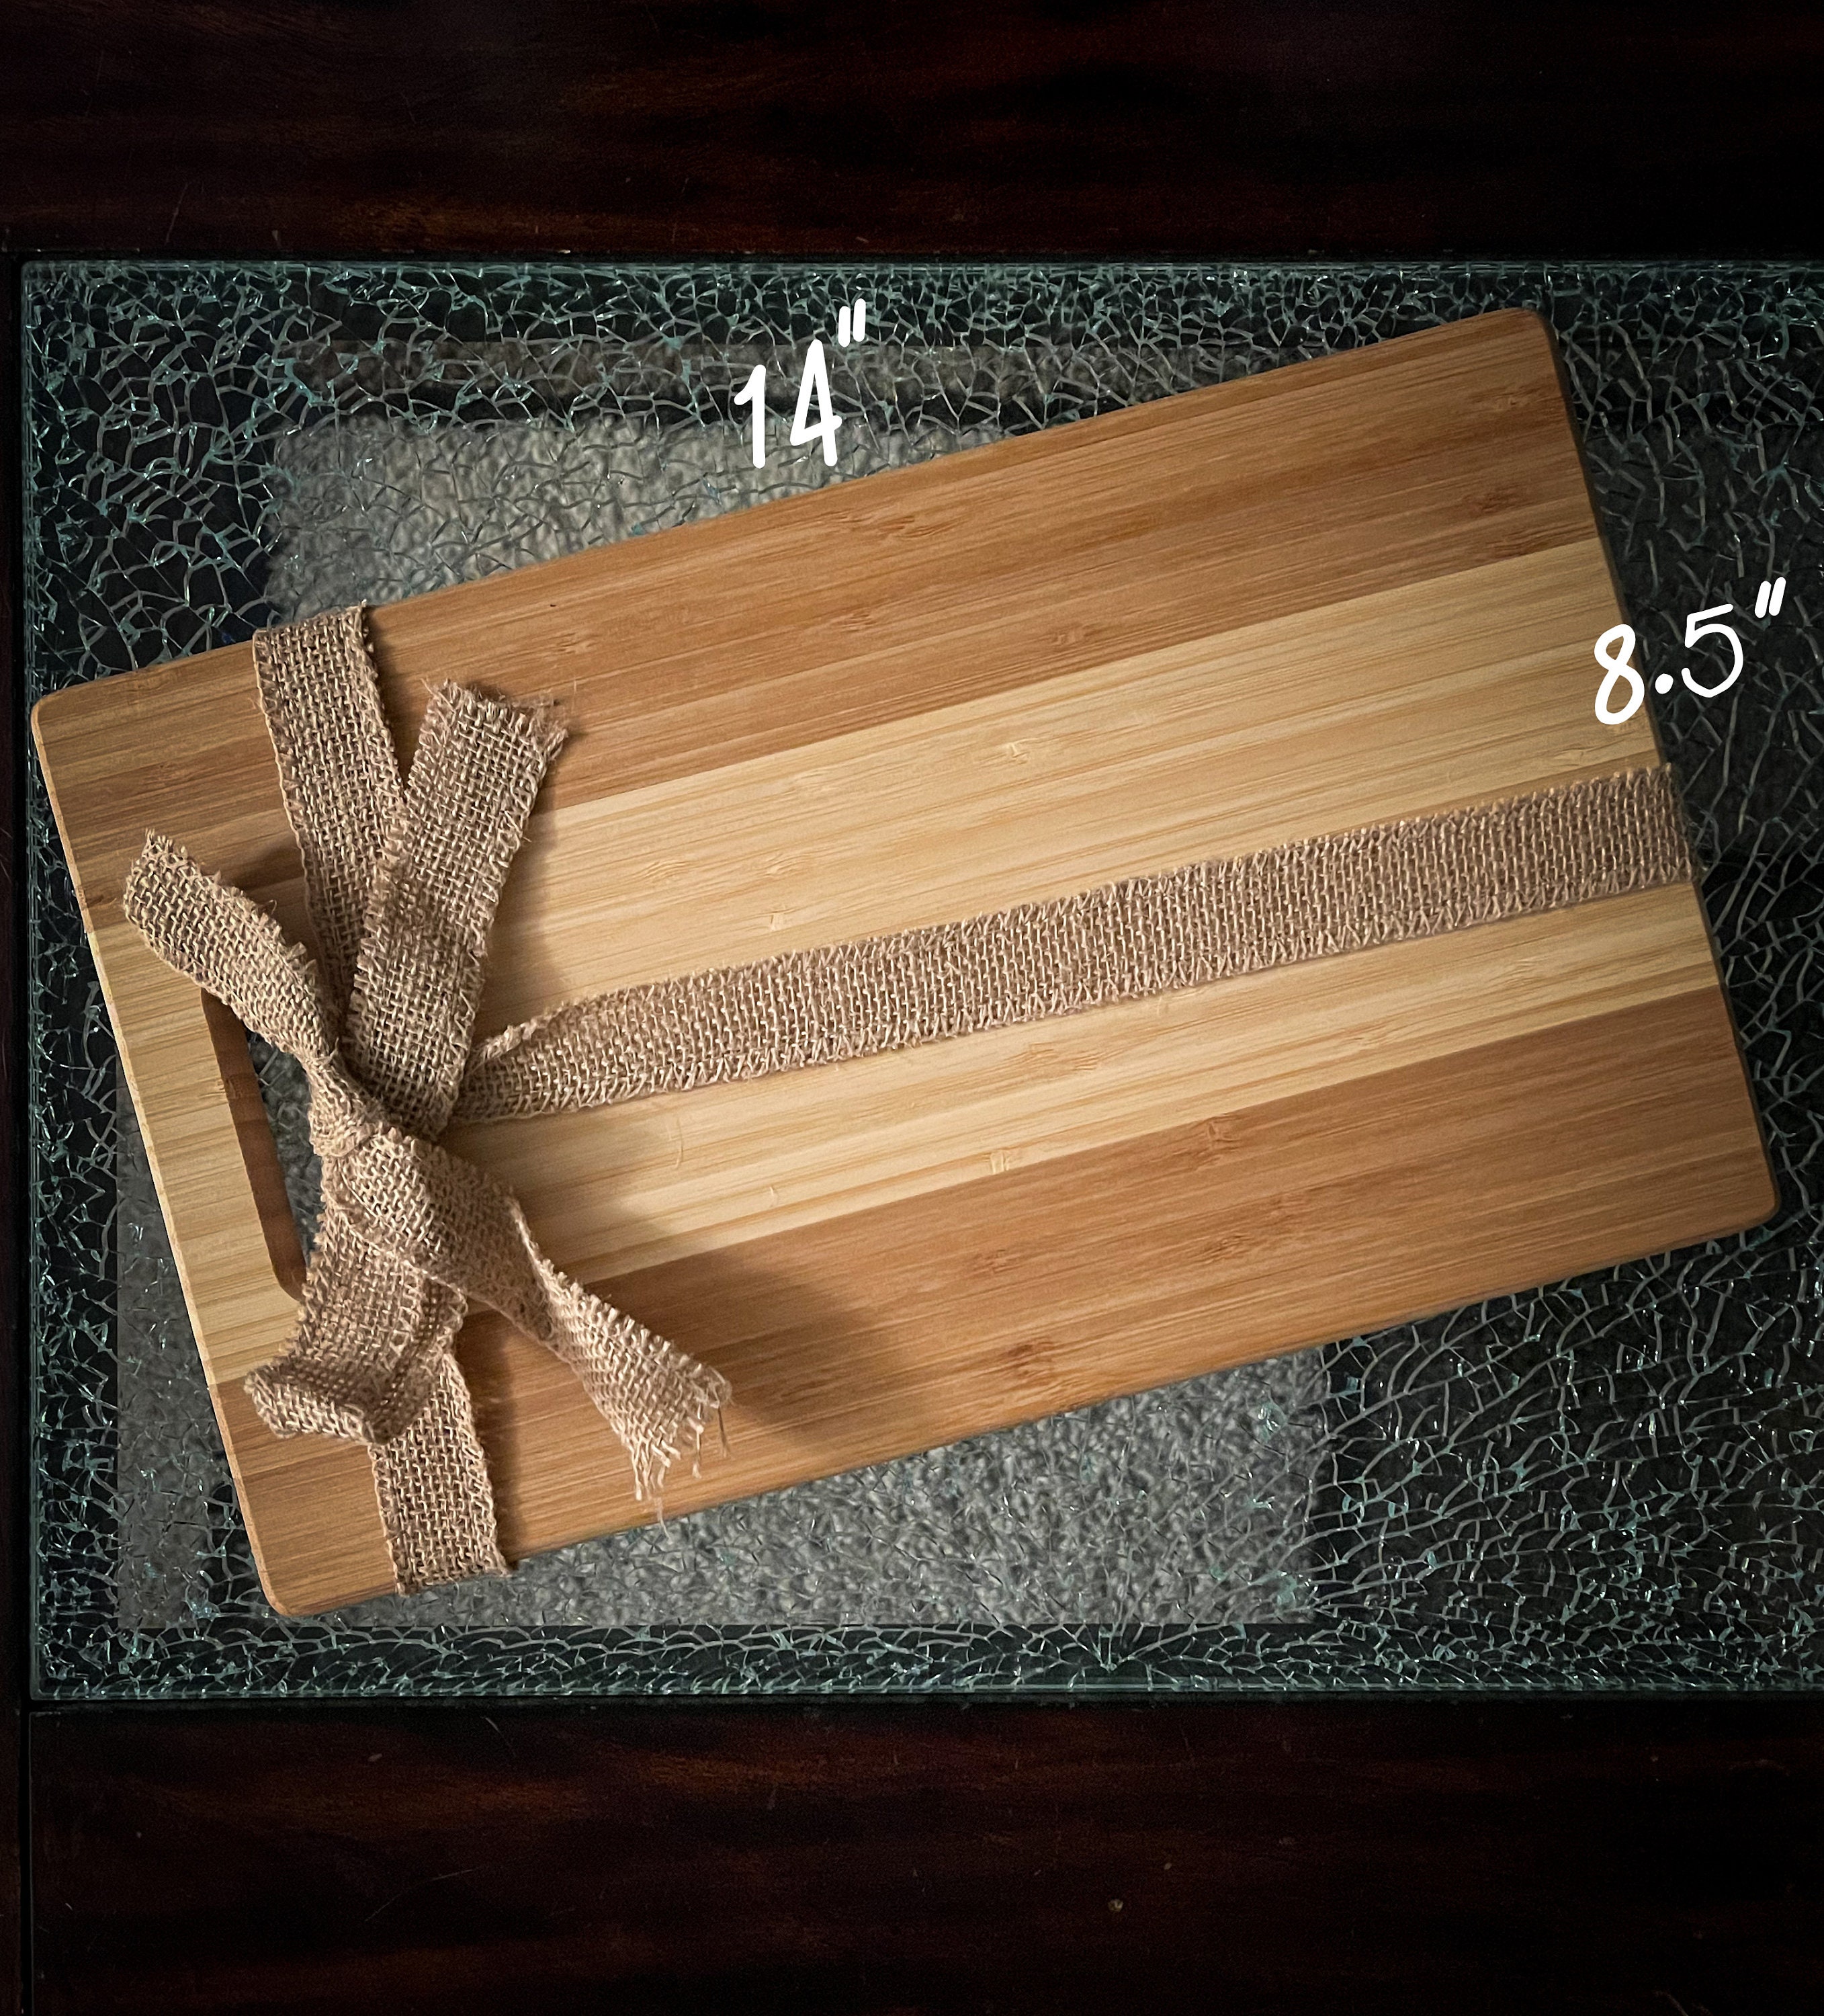 Bamboo Cutting Board. Keep This Kitchen Clean Eat Out. Hanging, Vinyl  Lettering Cutting Board. 8.5x5.5. 